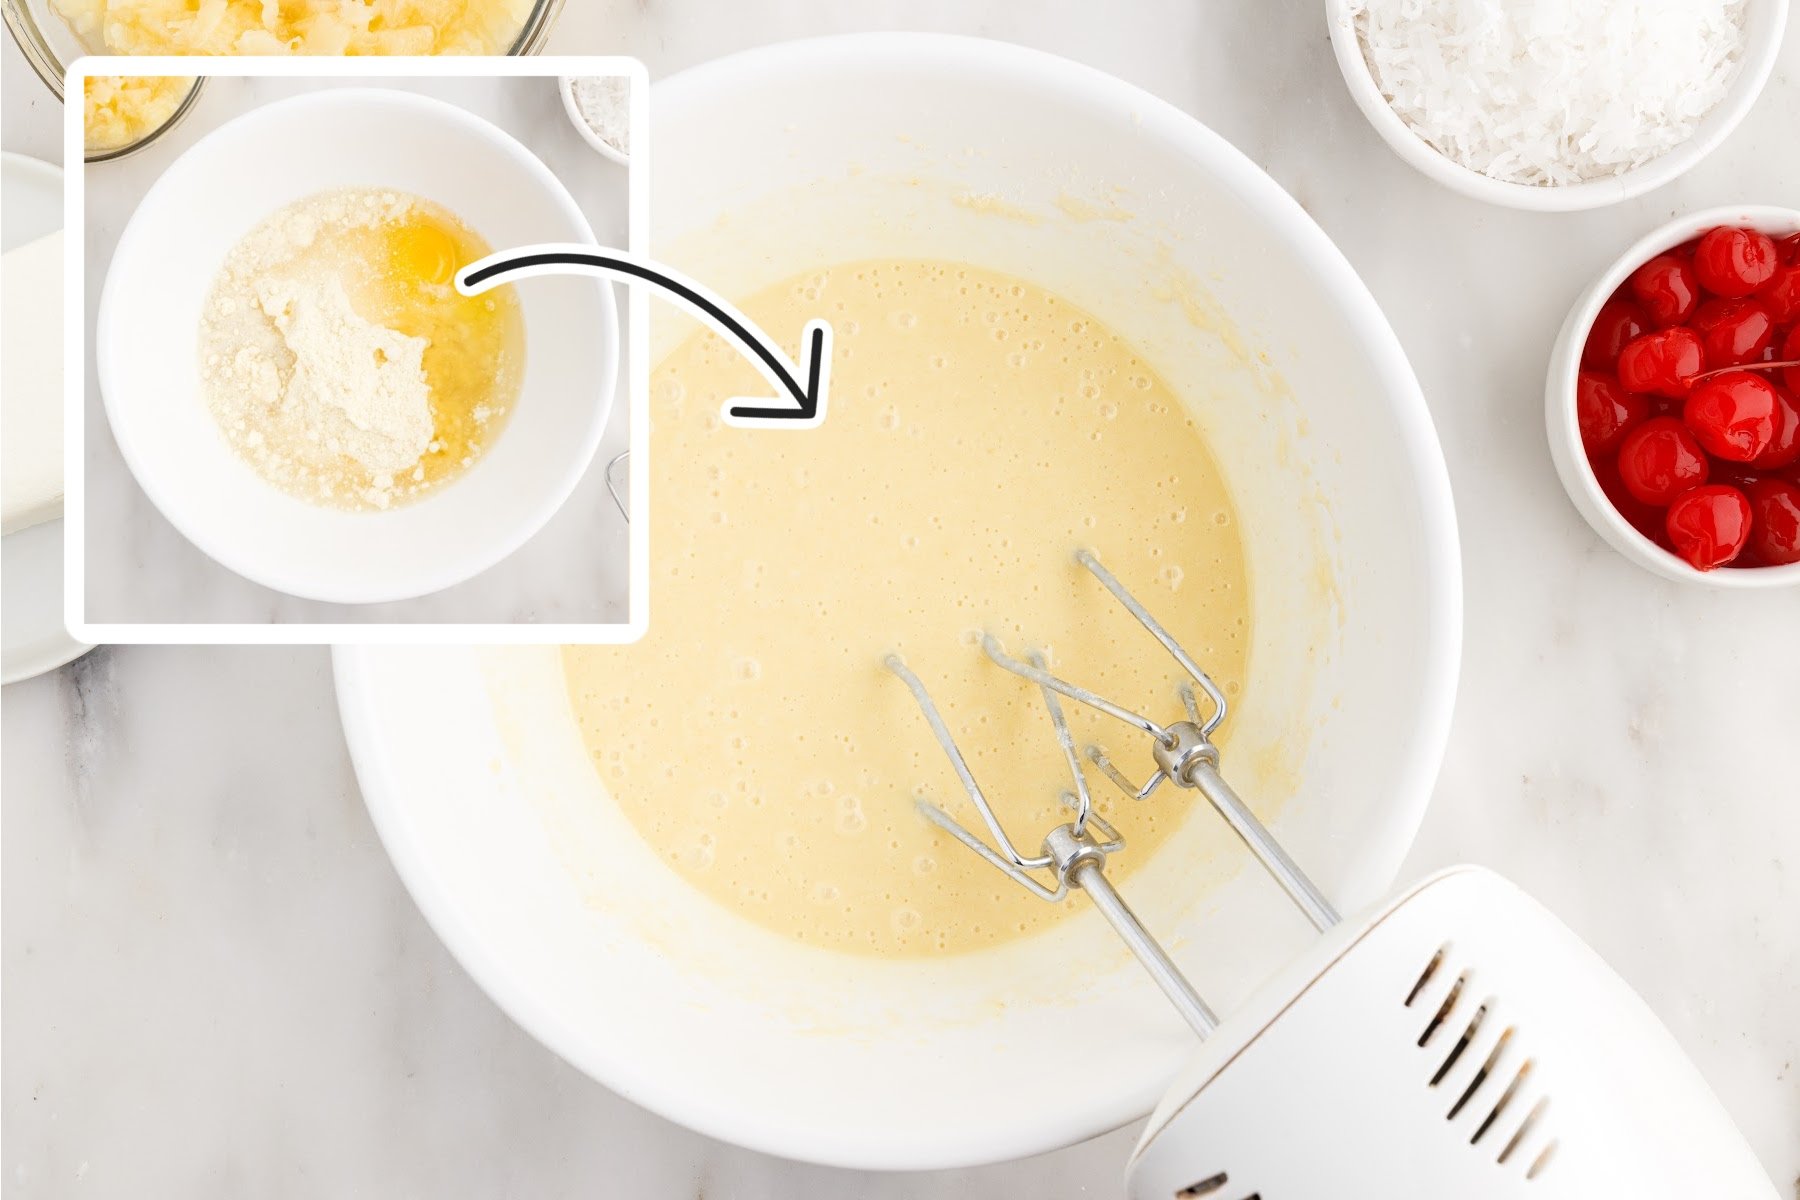 An image of cake mix oil and water in a bowl and an images of a bowl with ingredients mixed with a mixer.